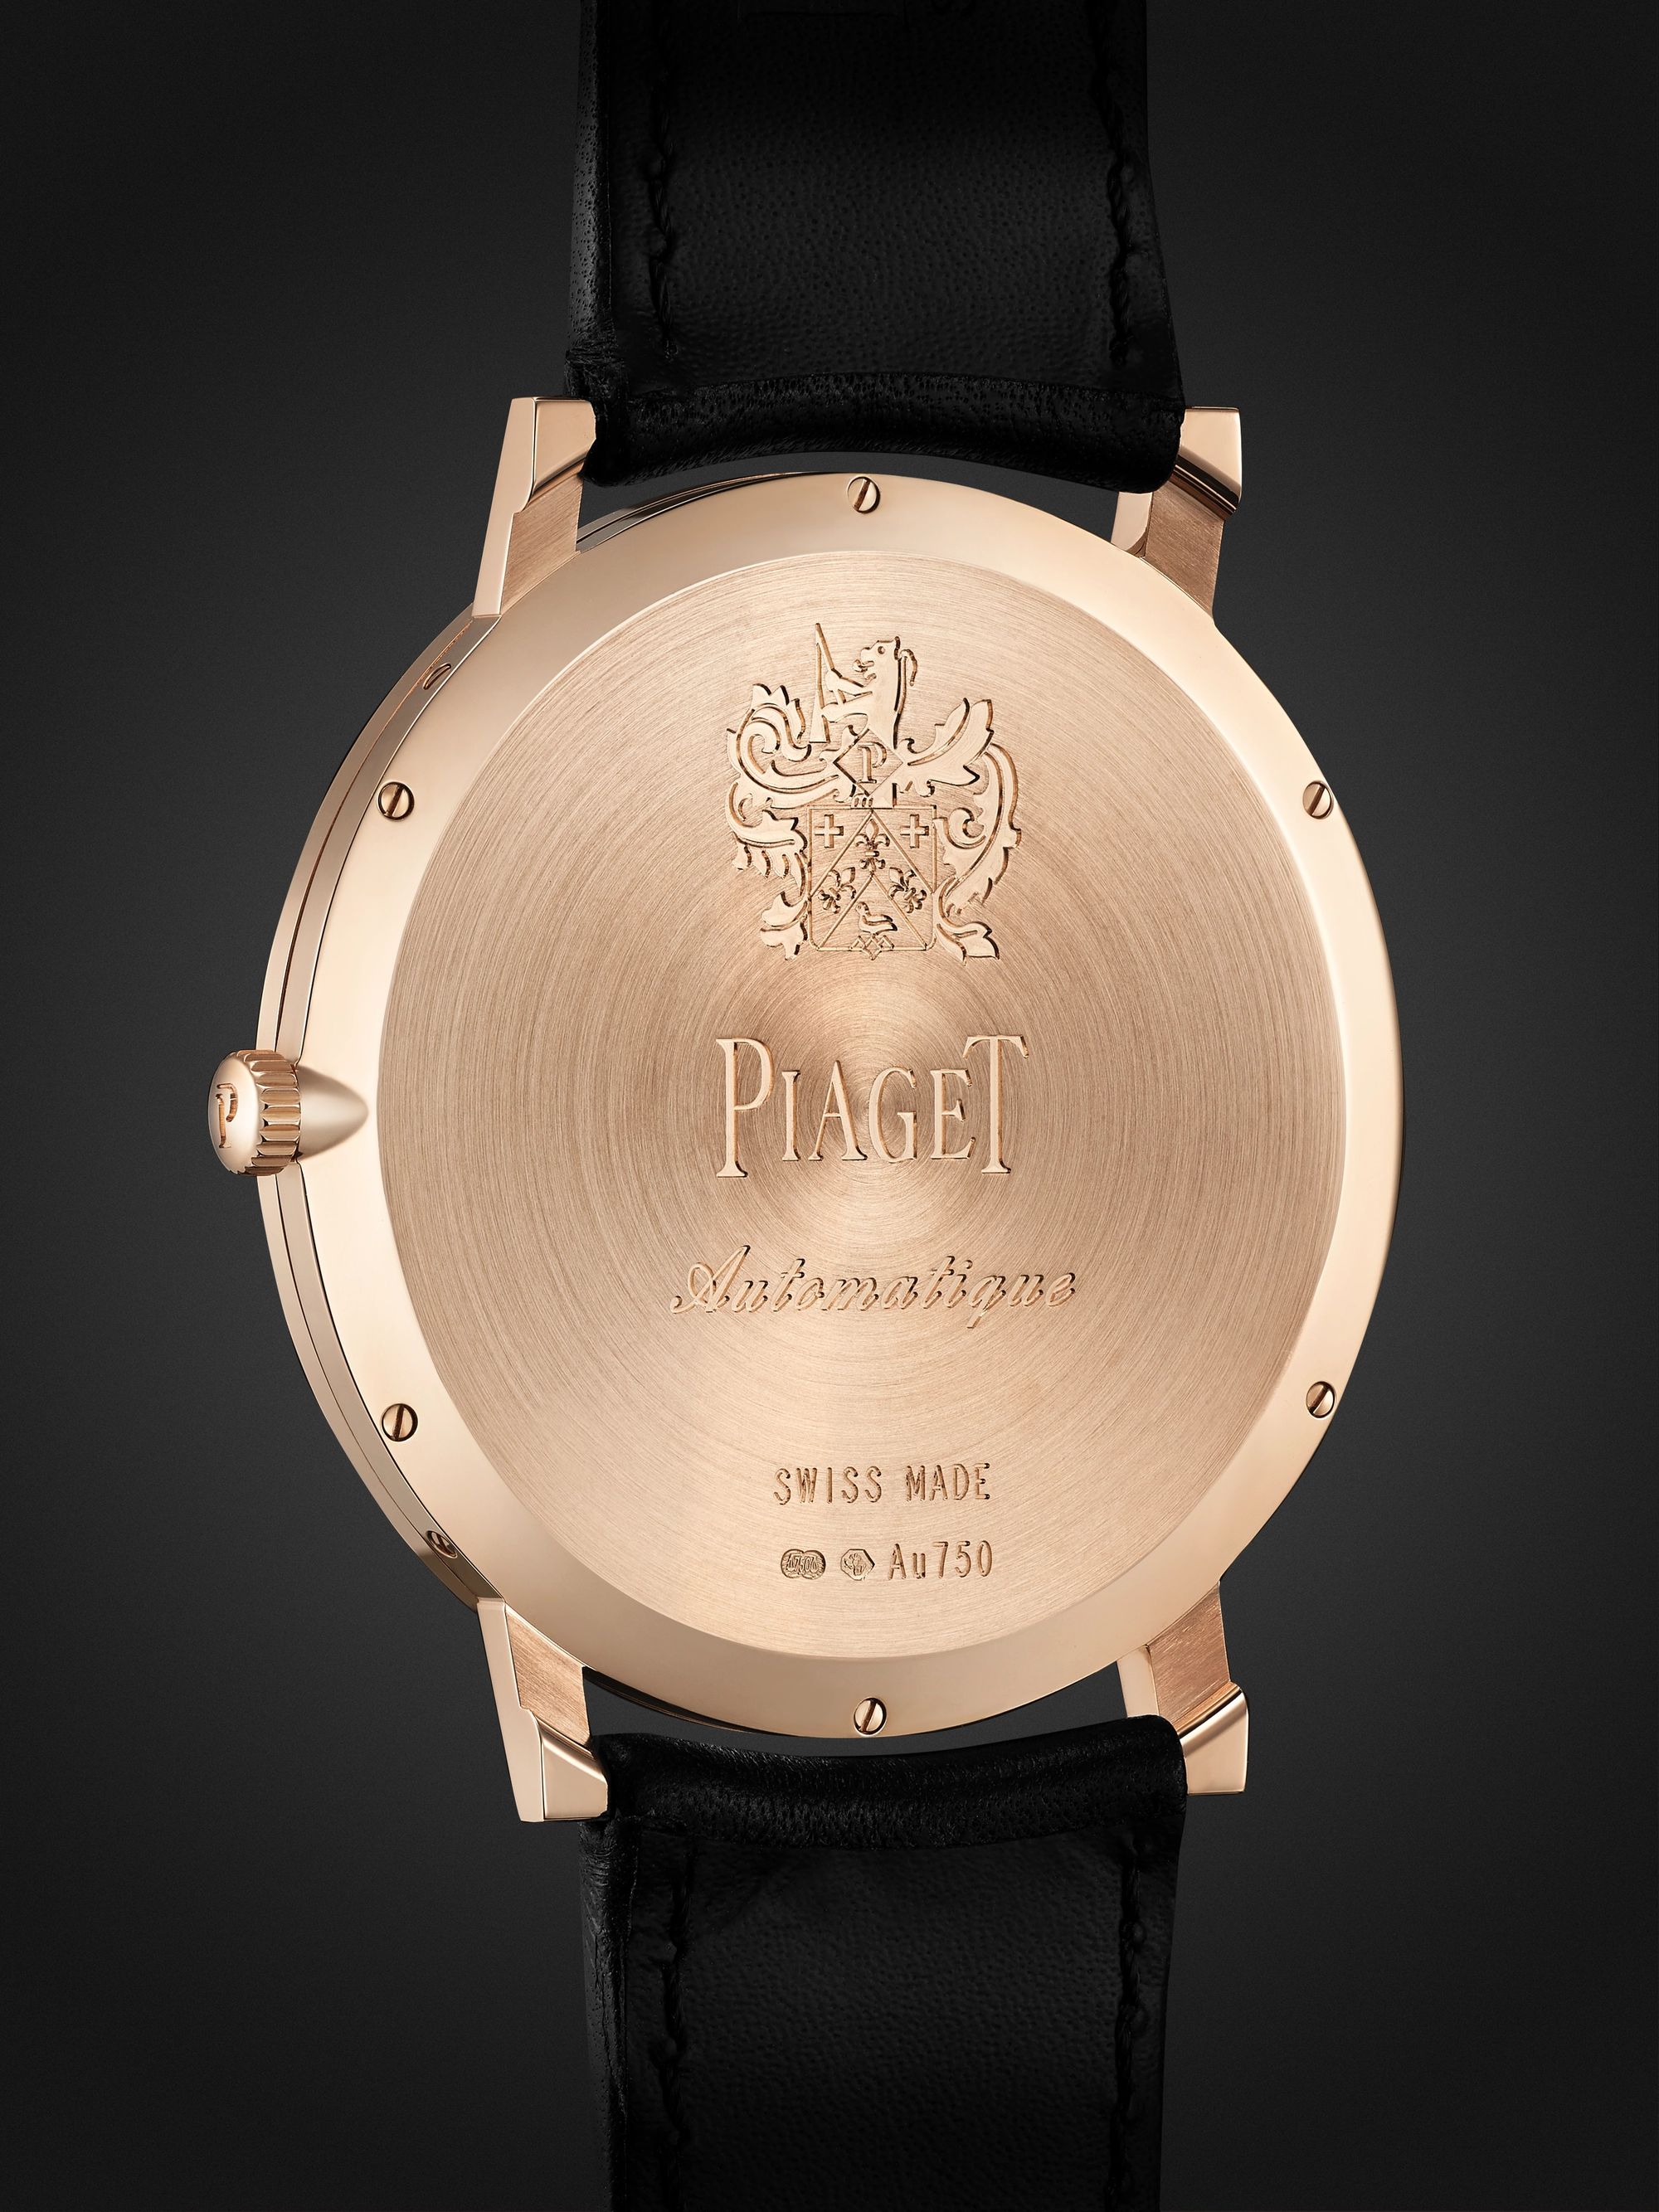 PIAGET Altiplano Ultimate Automatic 41mm 18-Karat Rose Gold and Leather Watch, Ref. No. G0B43120